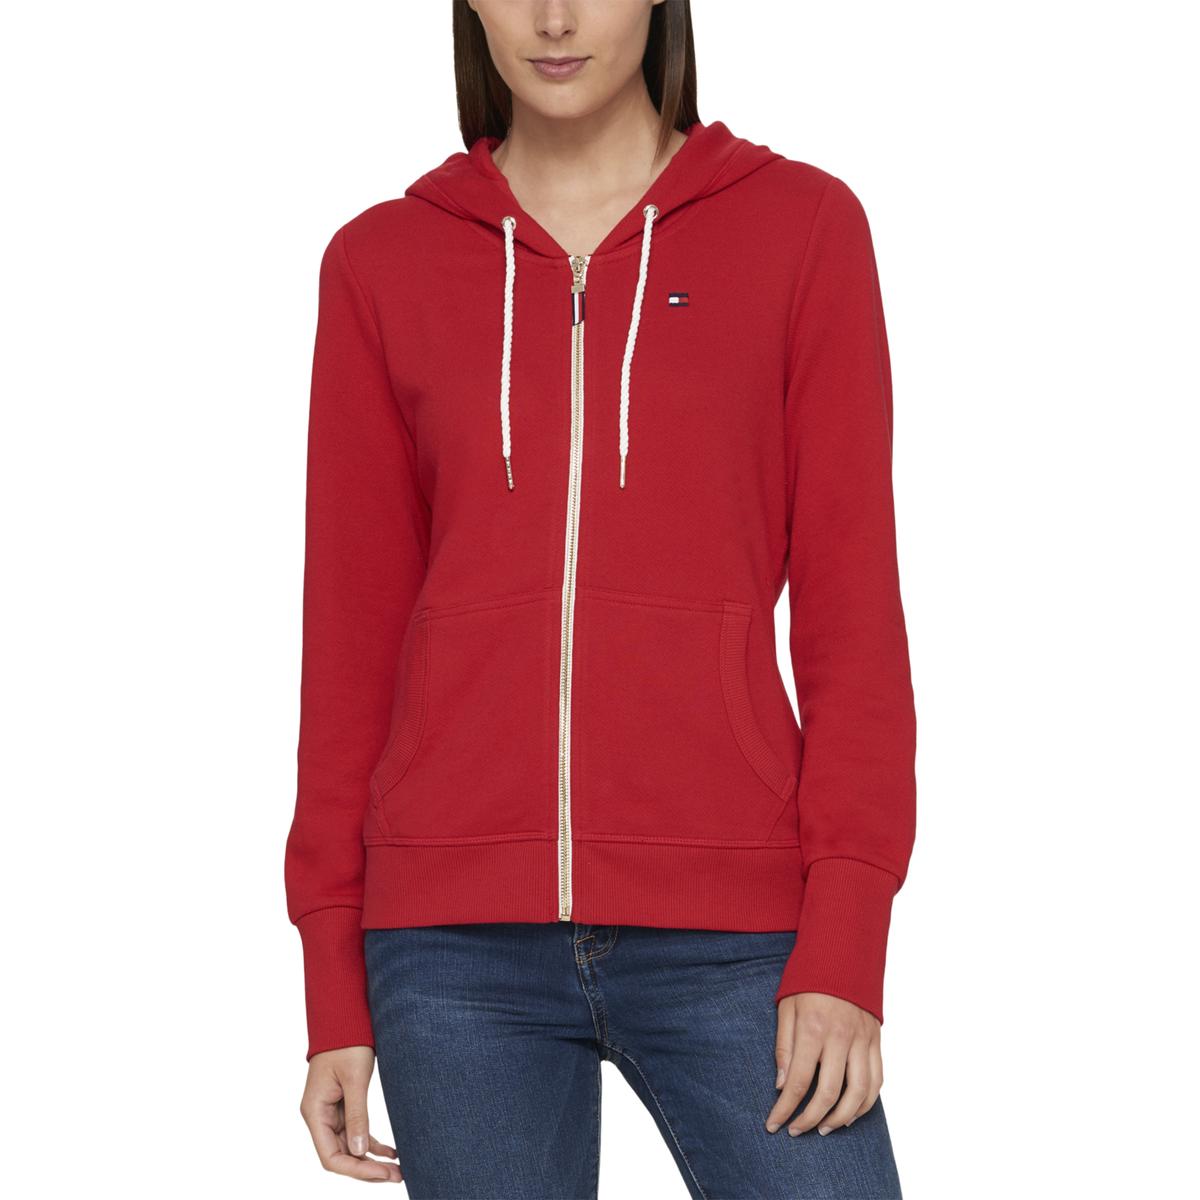 Tommy Hilfiger Womens Red Logo Hooded Casual Hoodie Top L BHFO 5359 | eBay